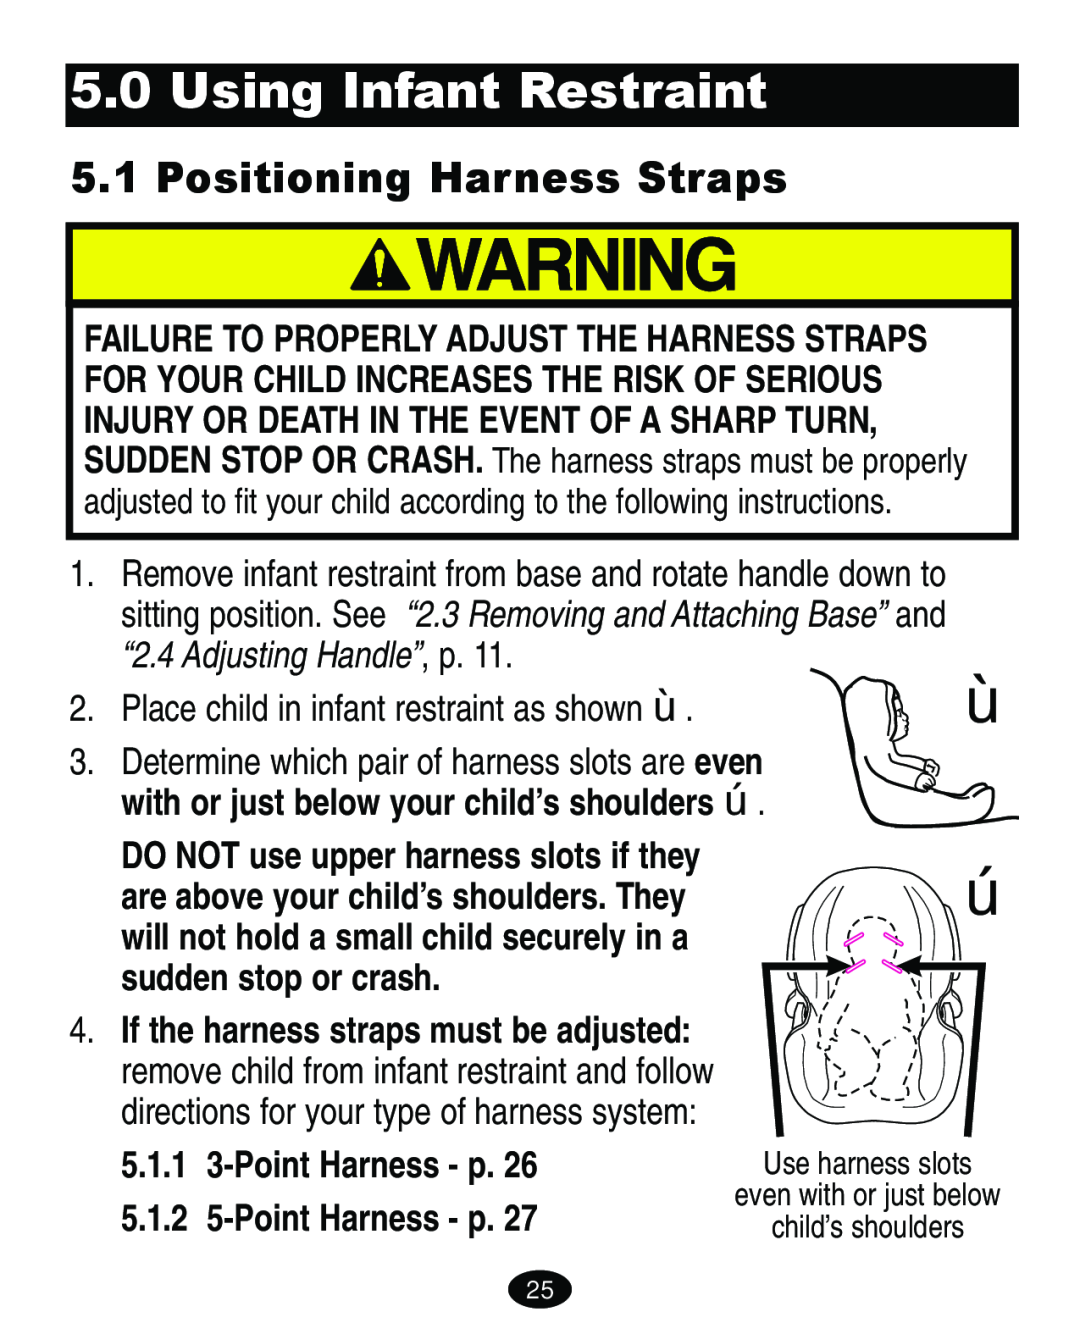 Graco 4460402 manual Using Infant Restraint, Positioning Harness Straps, with or just below your child’s shoulders , 5.1.1 